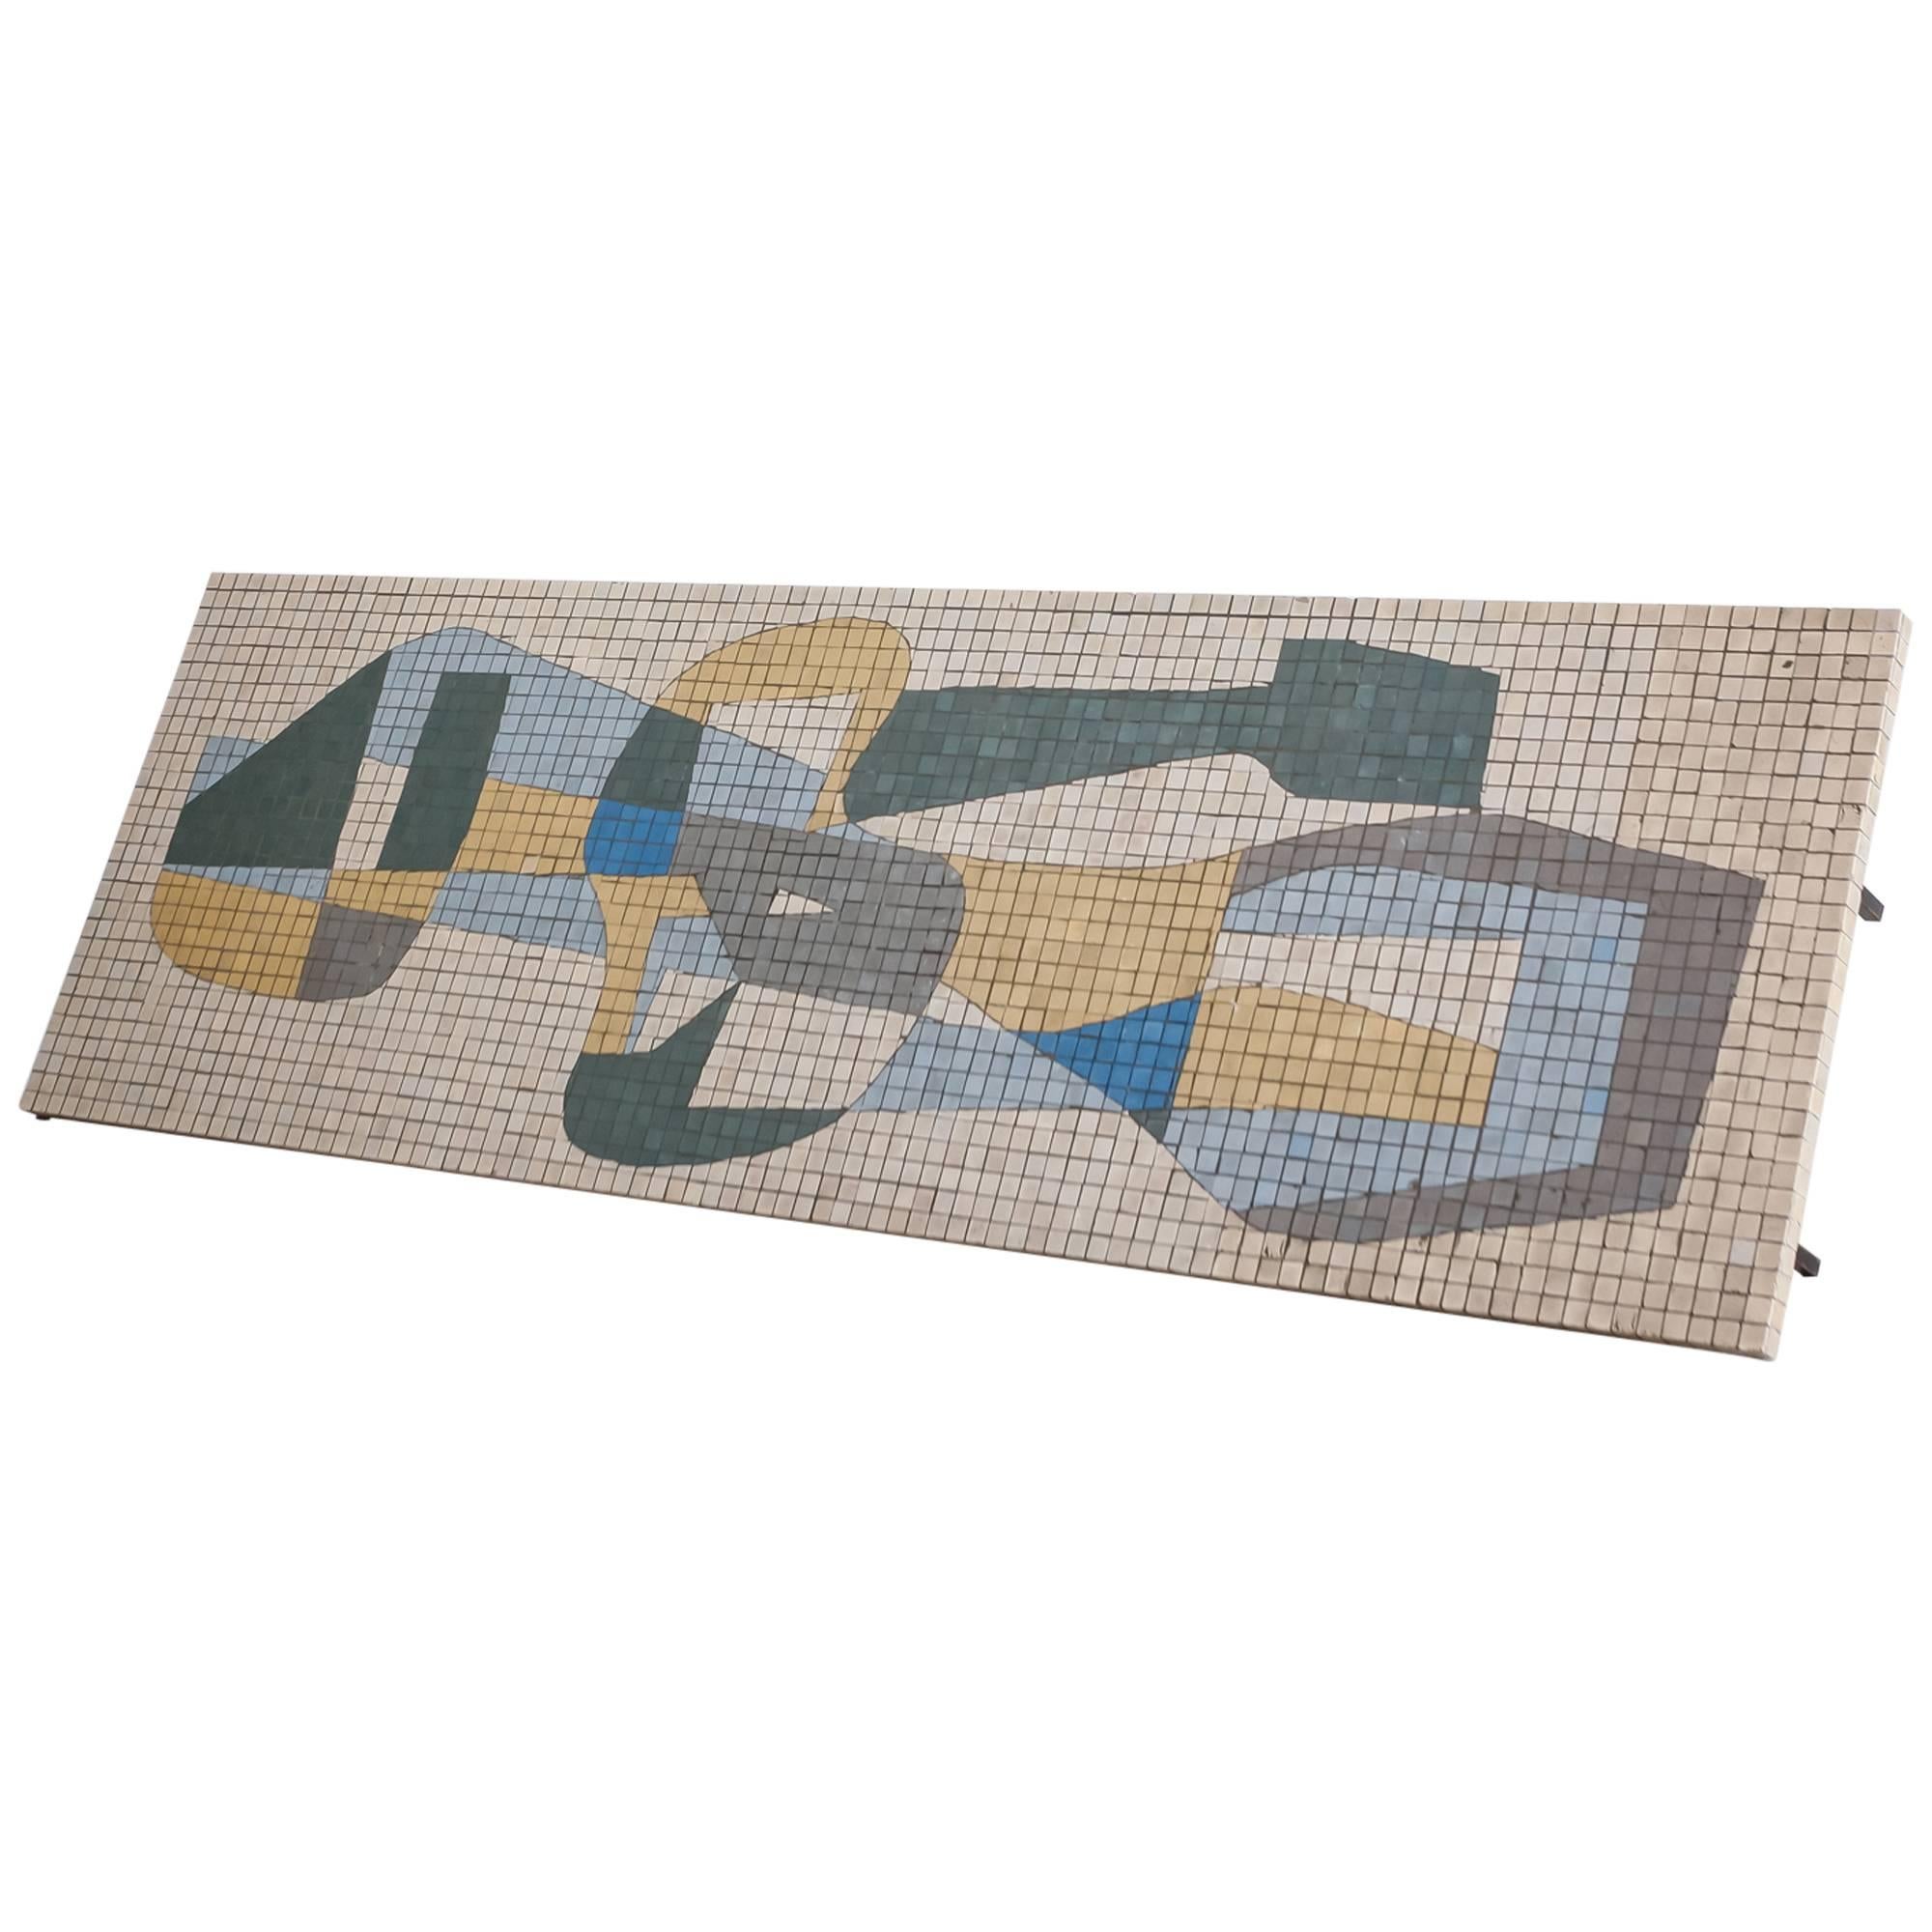 Large Rectangular Coffee Table with Abstract Mosaic Tiles, Germany, 1950s